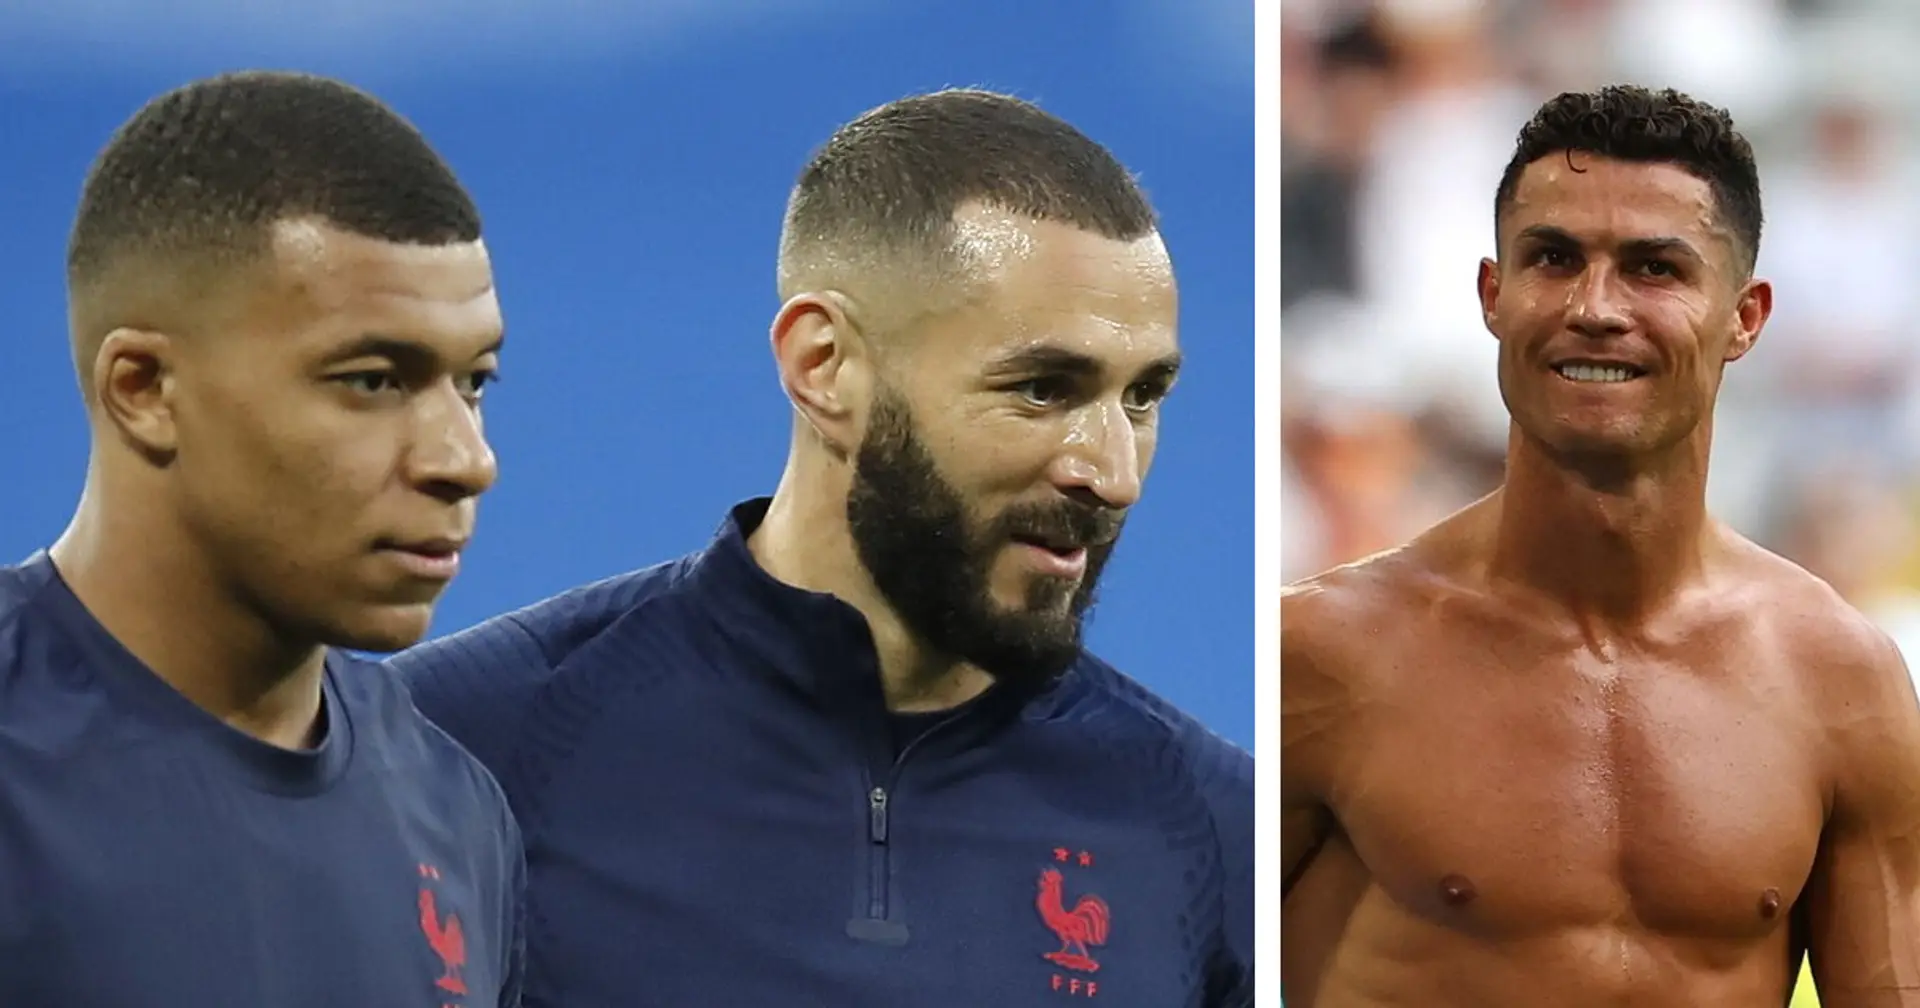 Benzema, Mbappe suffer racial abuse & 5 other under-radar Real Madrid stories